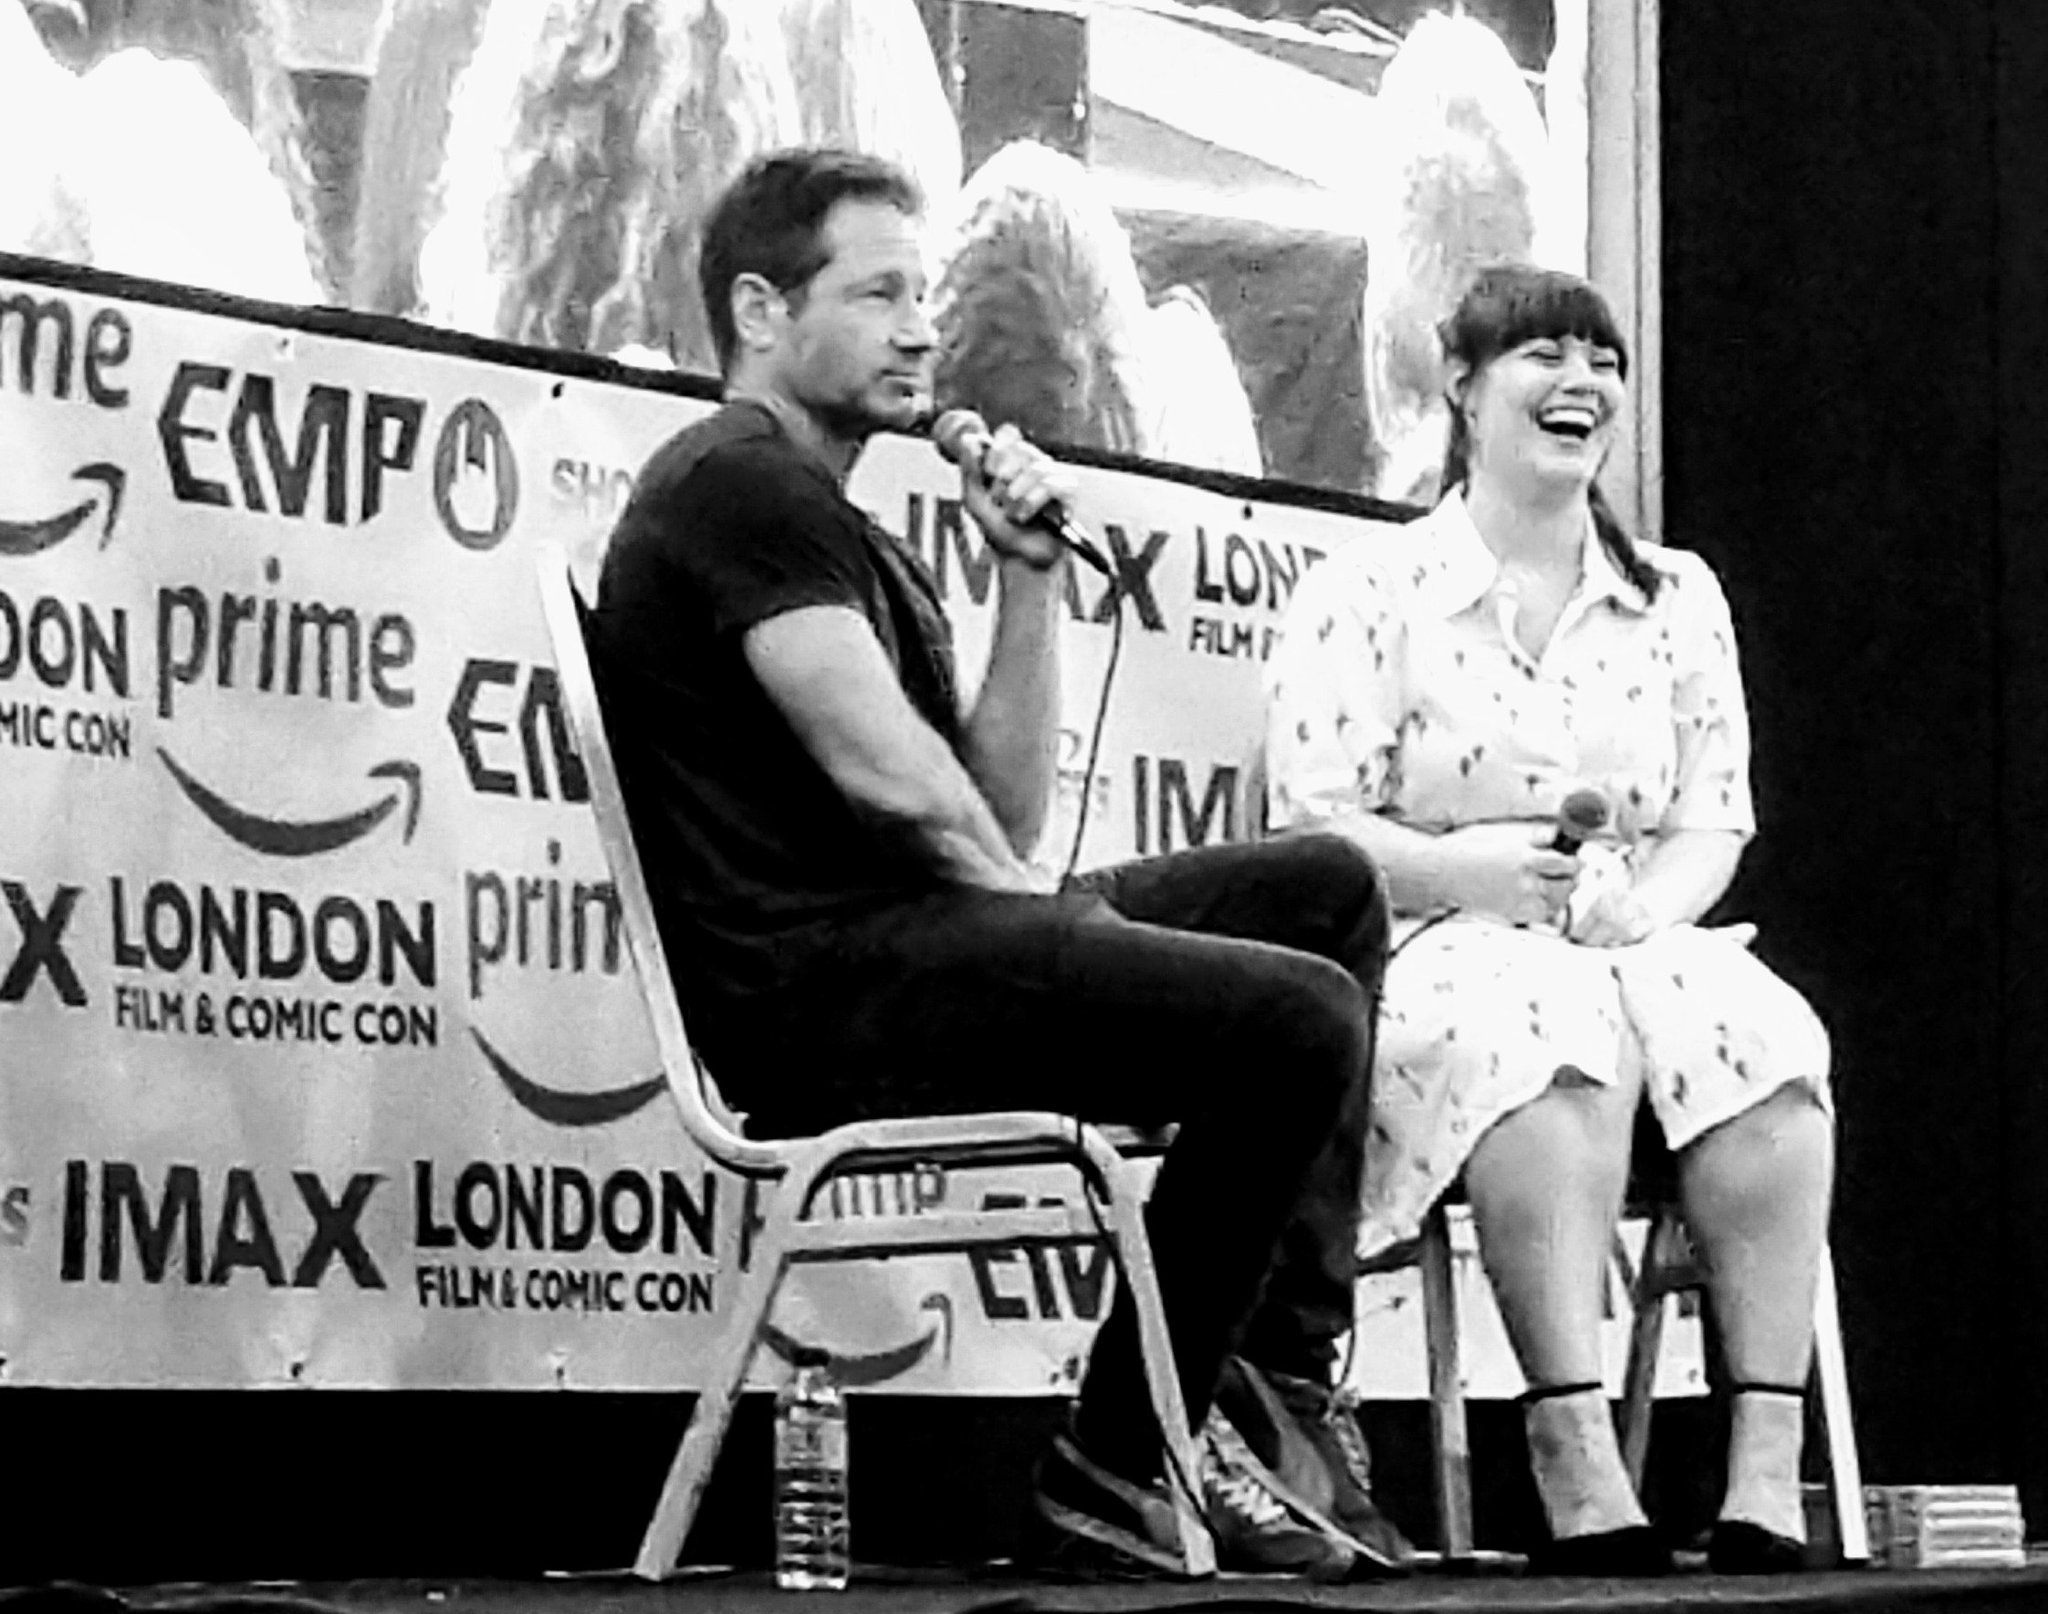 2018/07/28 - David at London Film & Comic Con at Olympia London - Page 2 DjNG2GXWsAEa-Ov